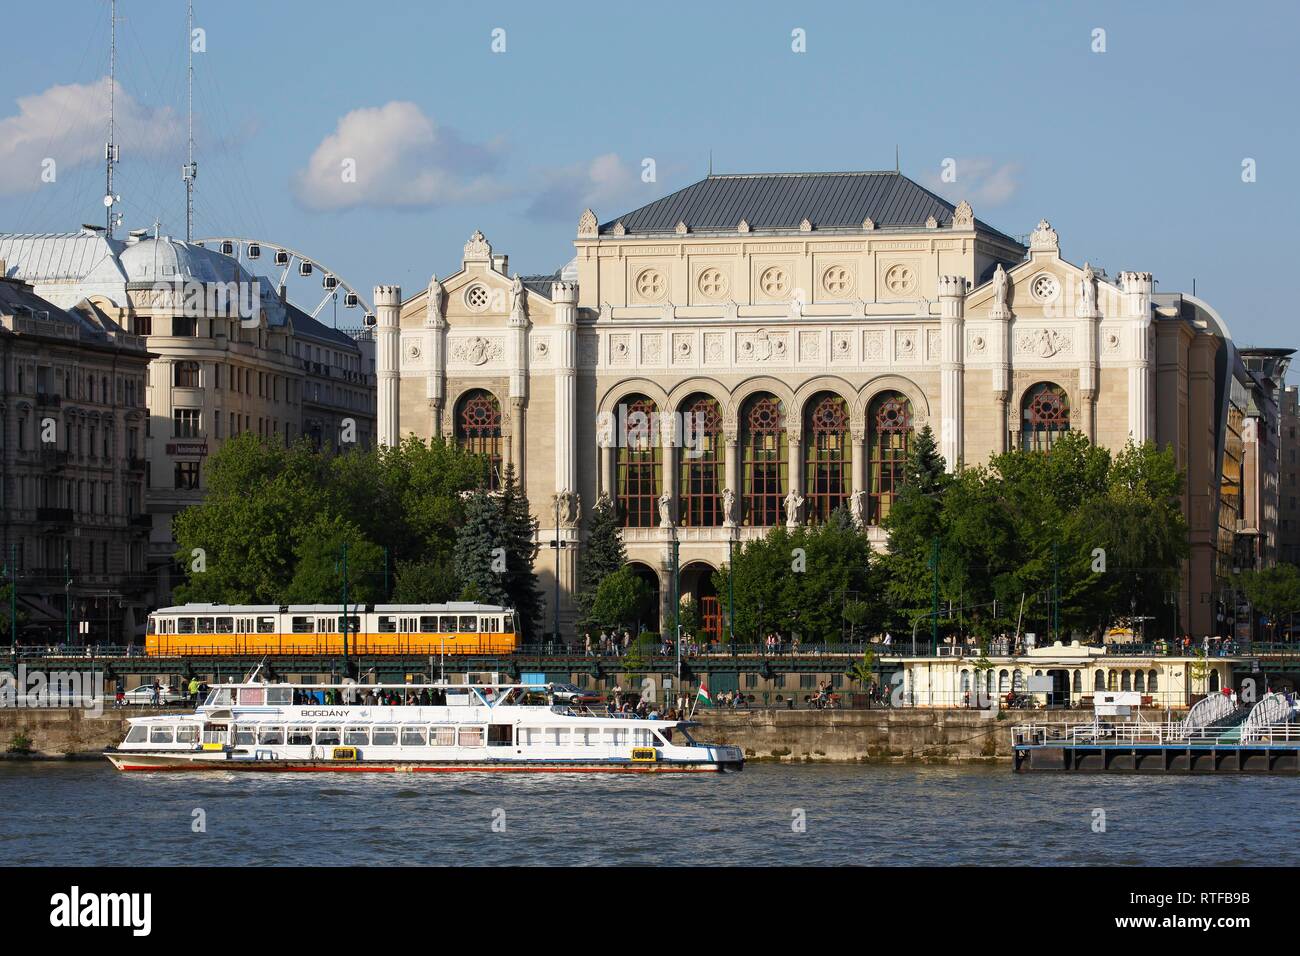 Vigadó Concert Hall at the Danube, Pester Redoute, Budapest, Hungary Stock Photo